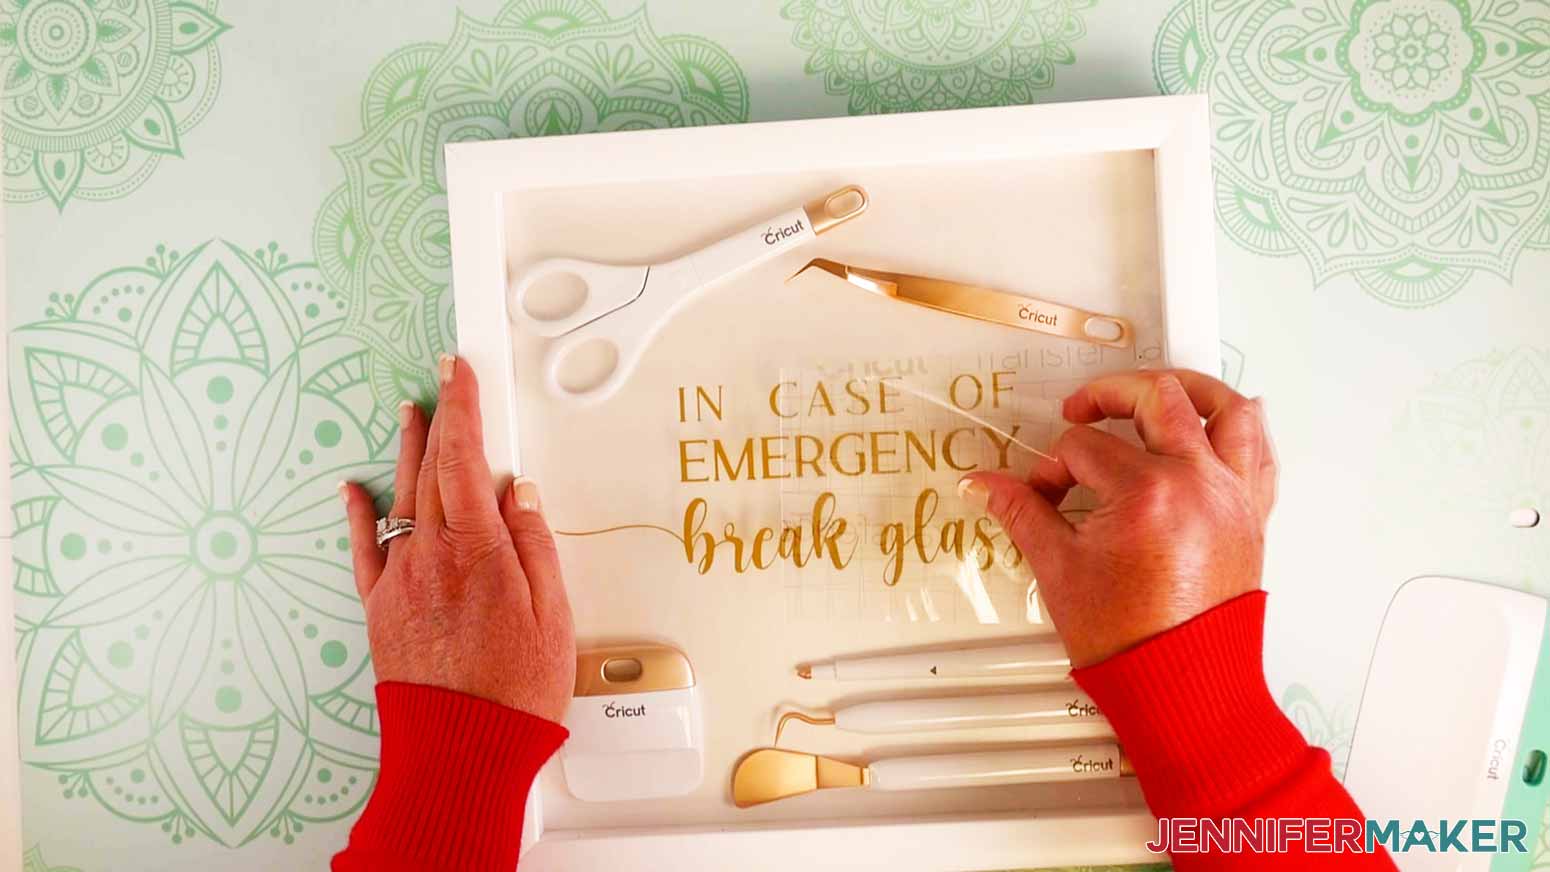 Removing transfer tape from DIY shadow box decal